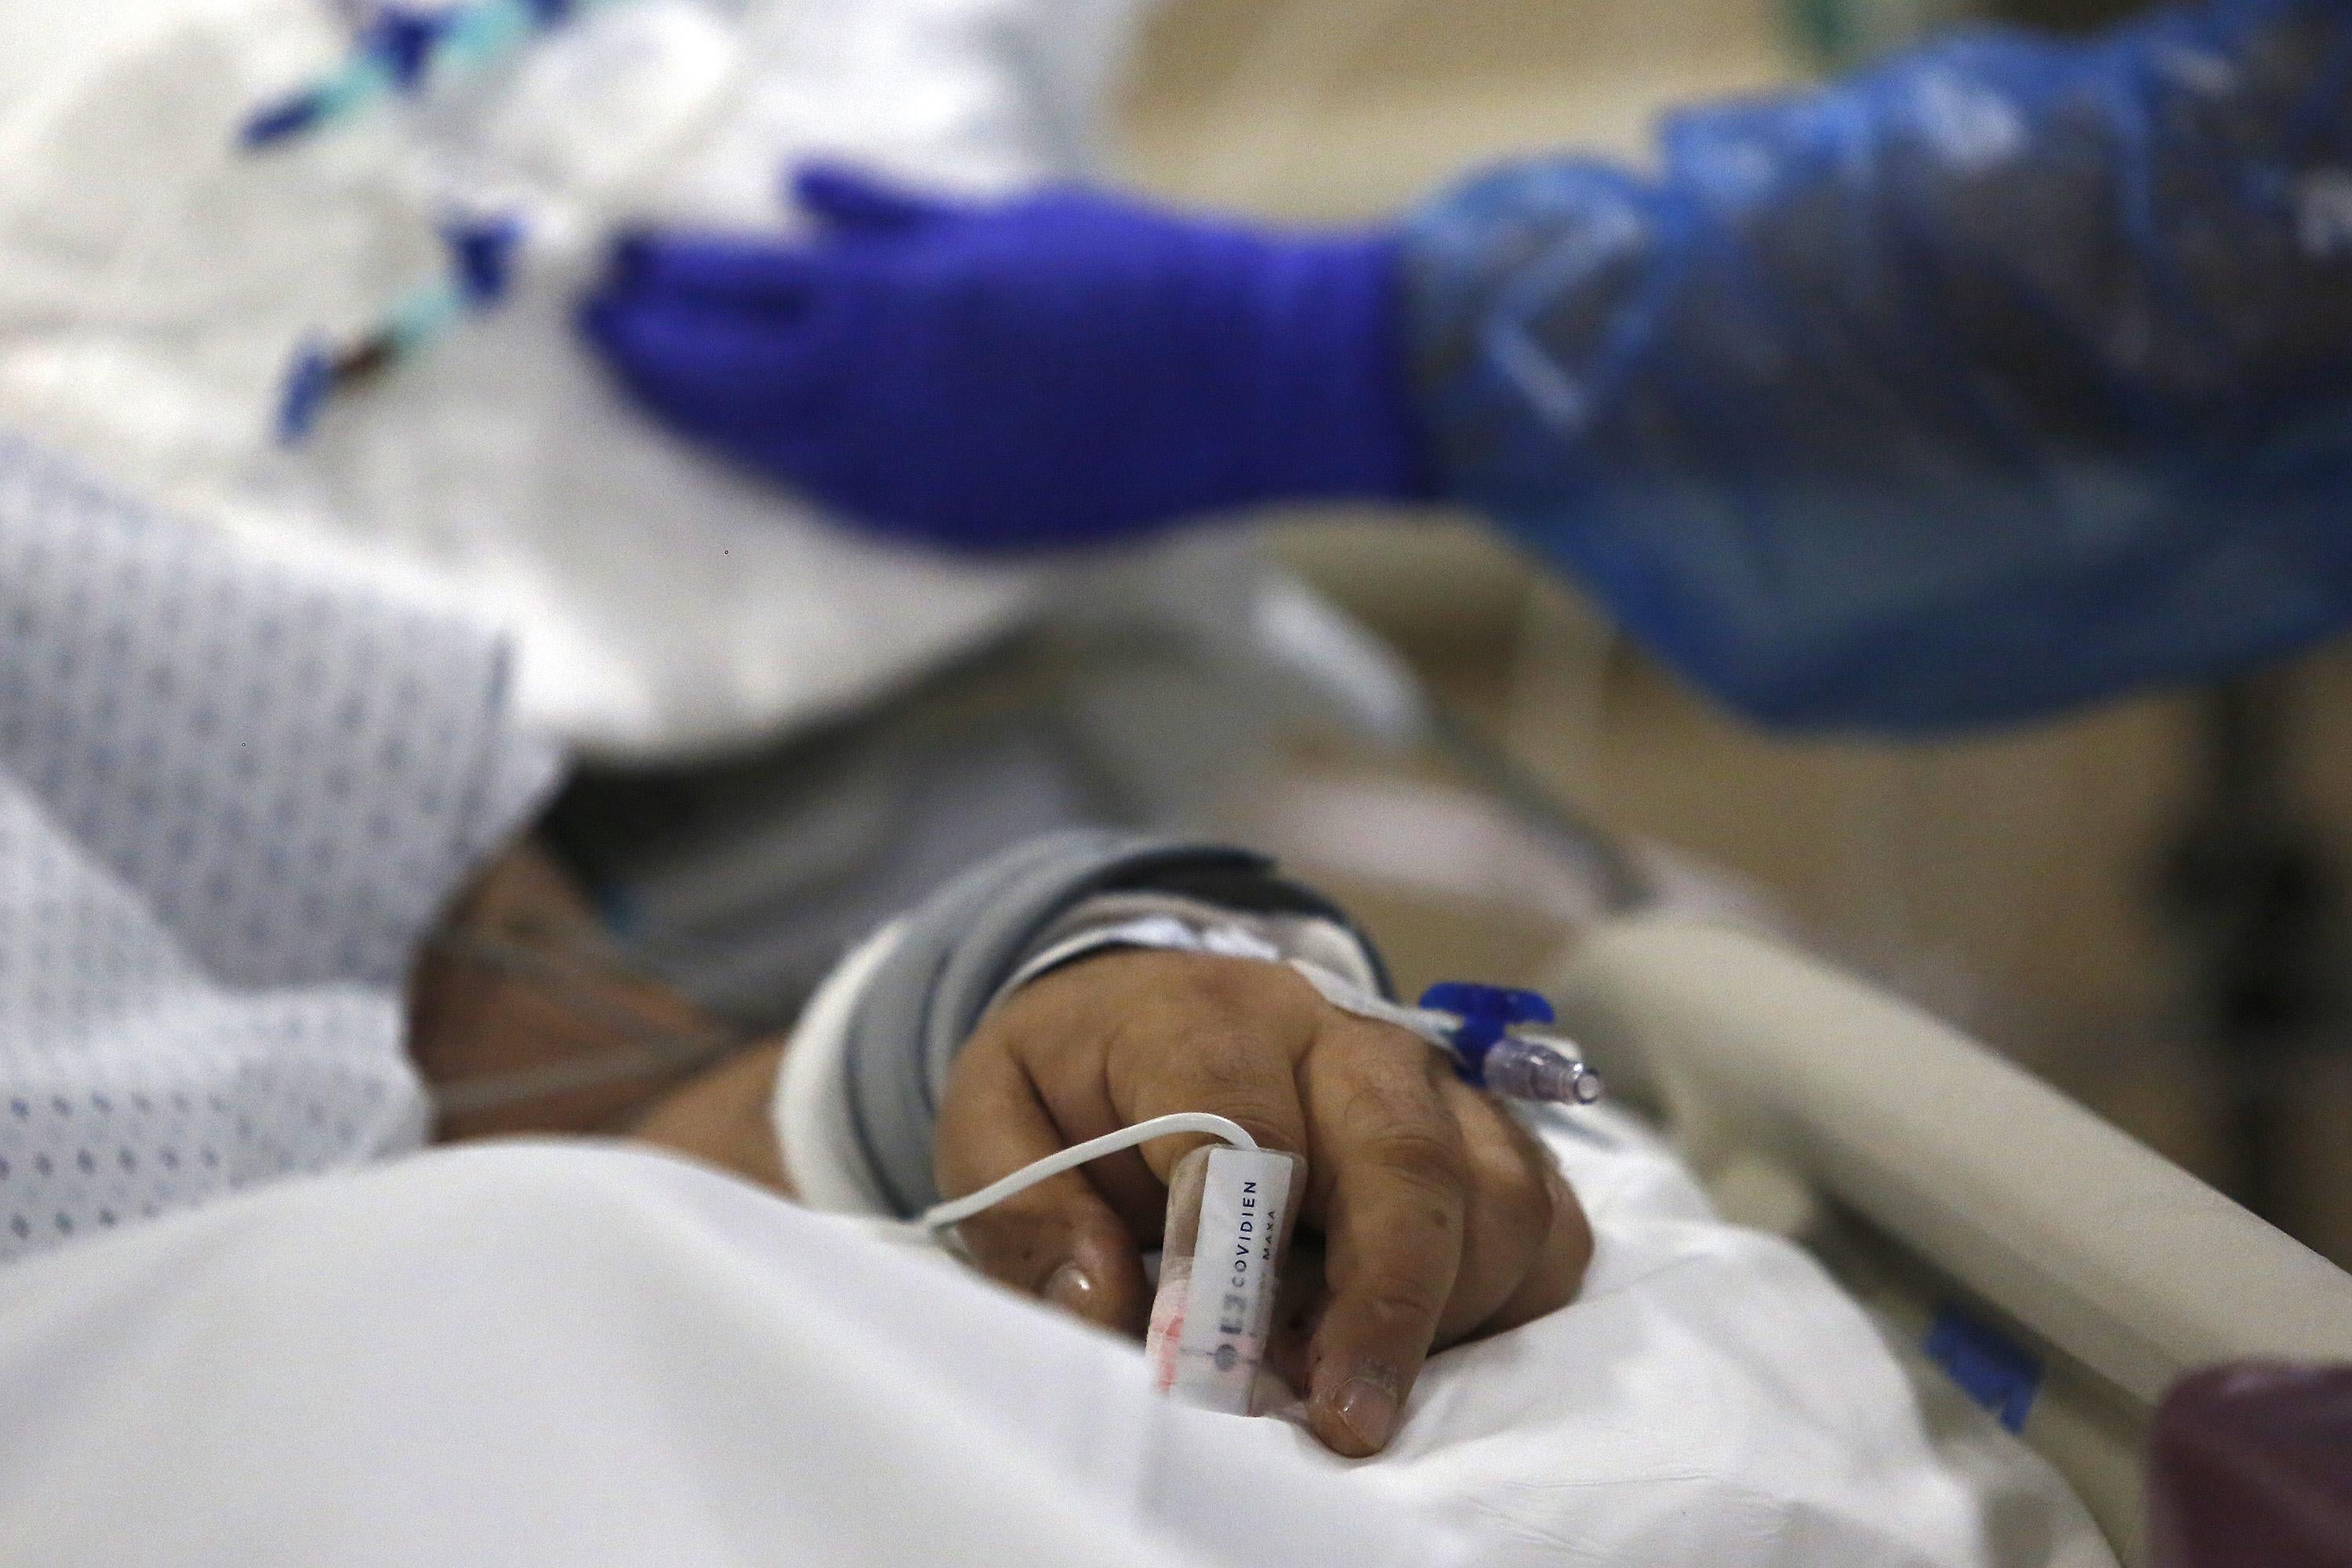 A close-up of a patient's hand on a hospital bed as gloved hands work nearby.